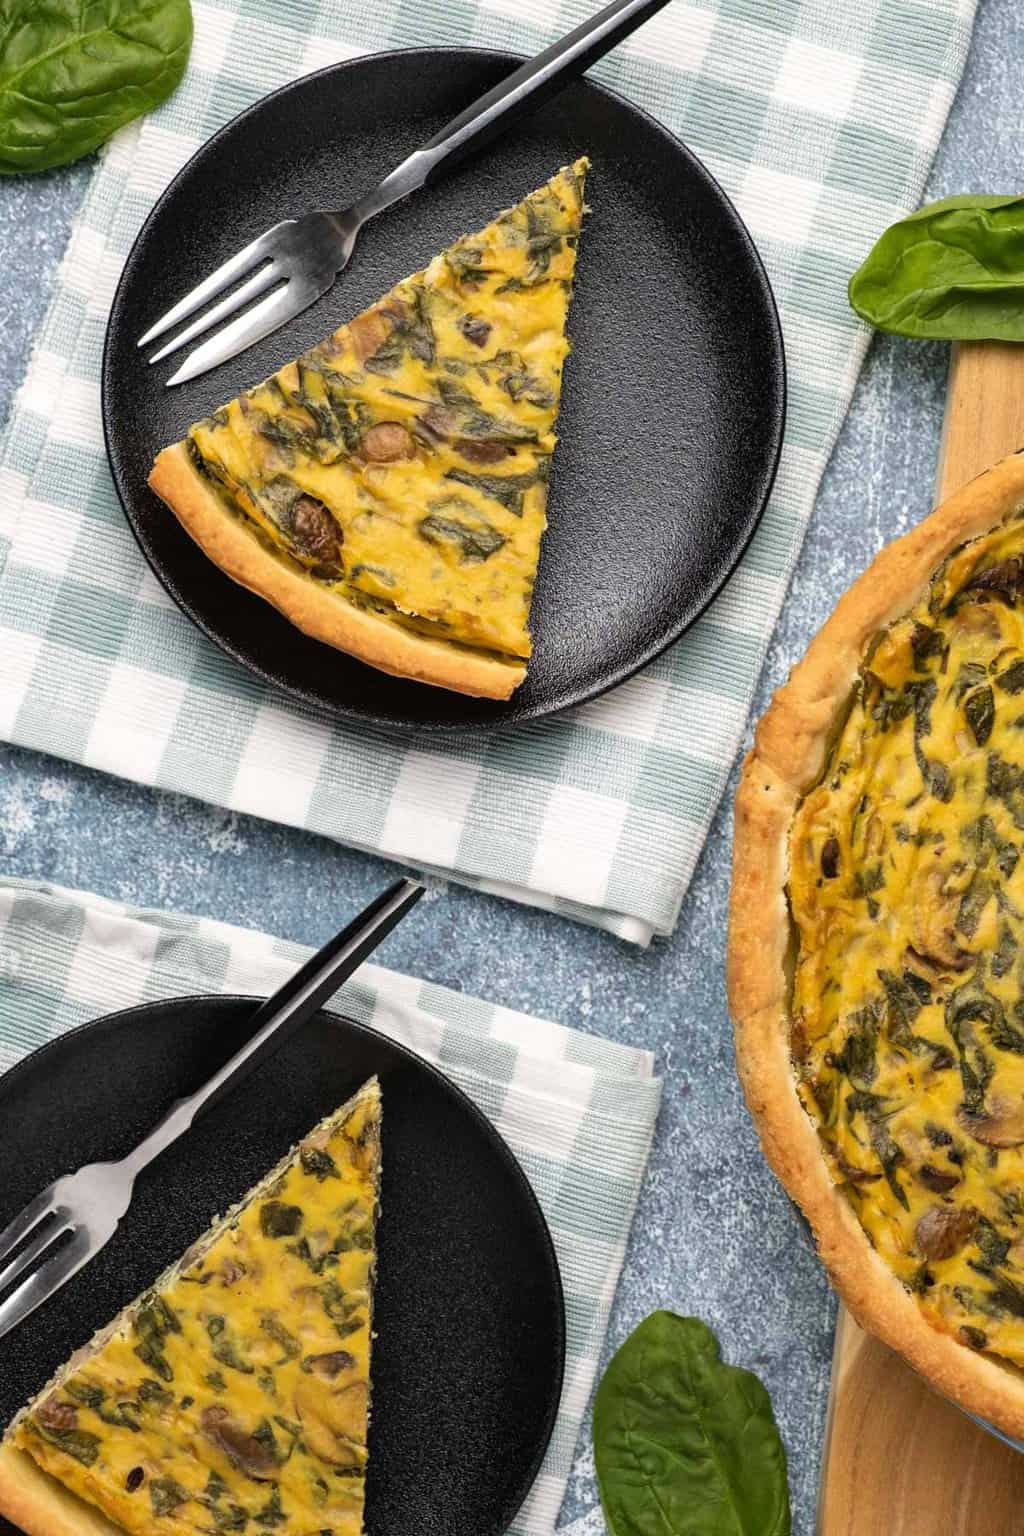 Slices of vegan quiche on black plates with forks. 